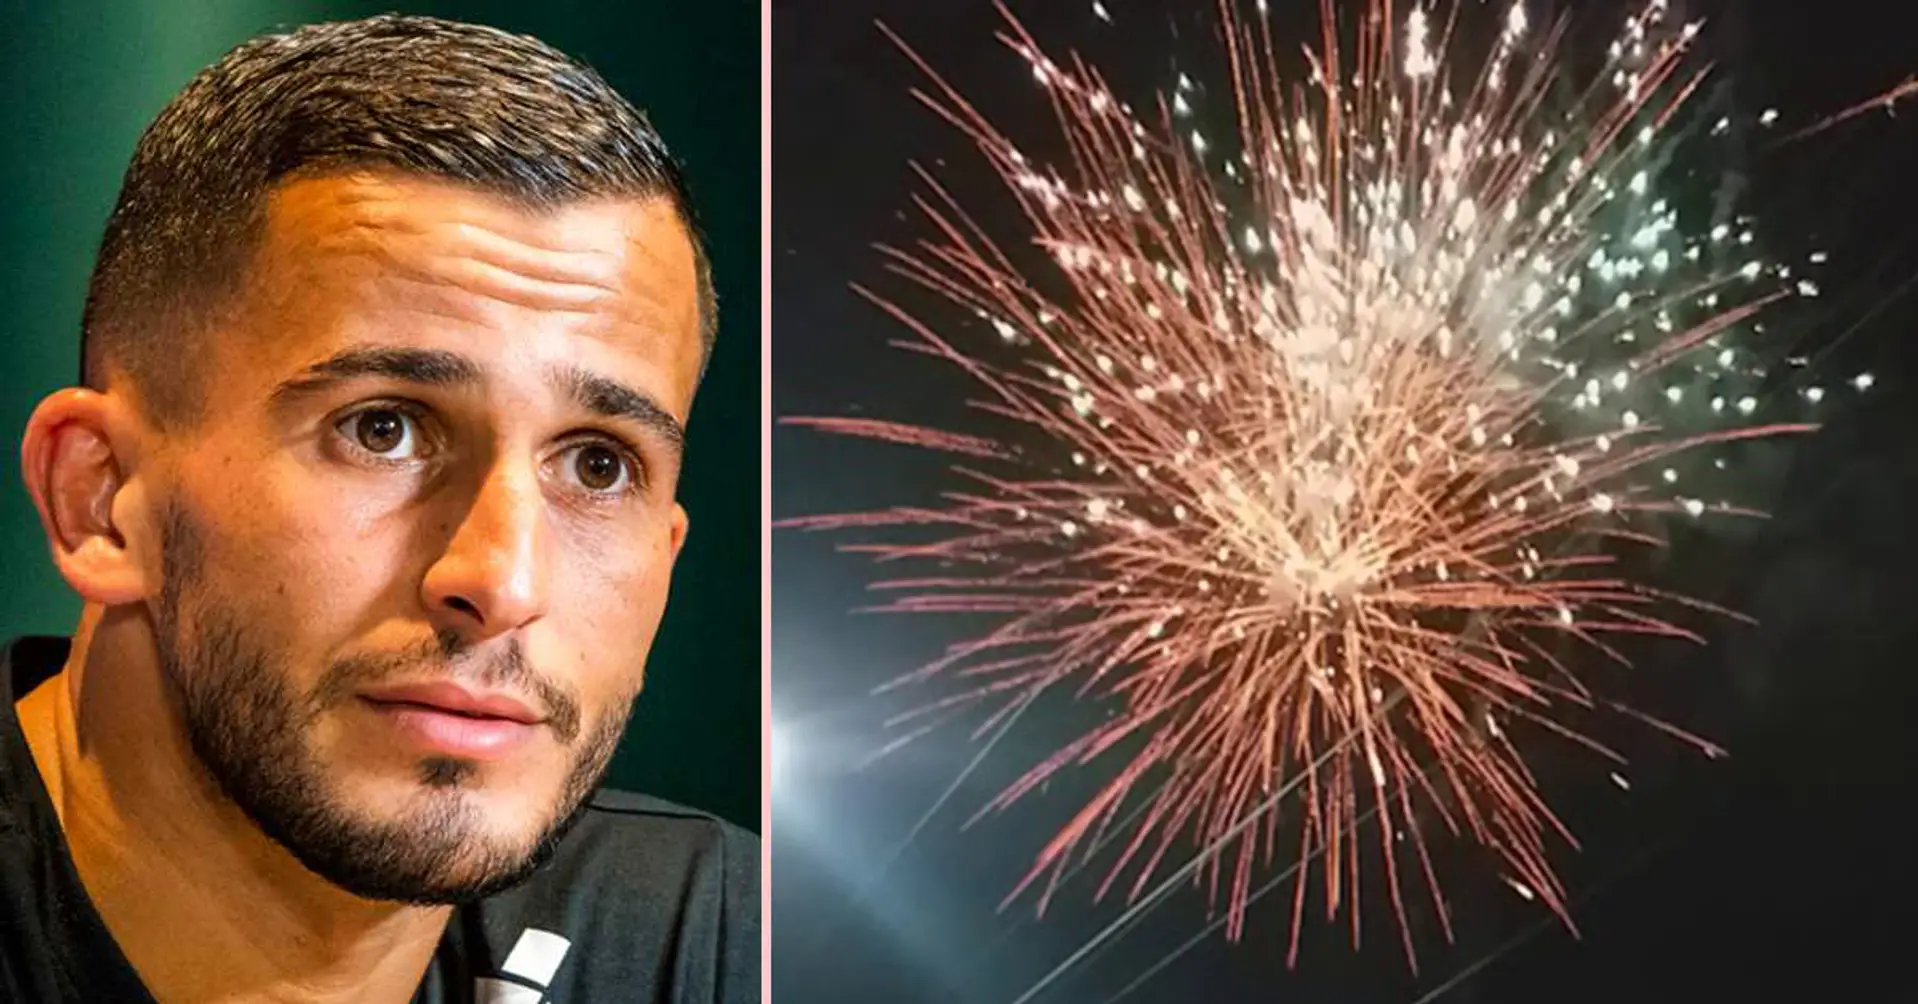 Galatasaray star rushed to hospital with burns to his face after firework exploded in his hand